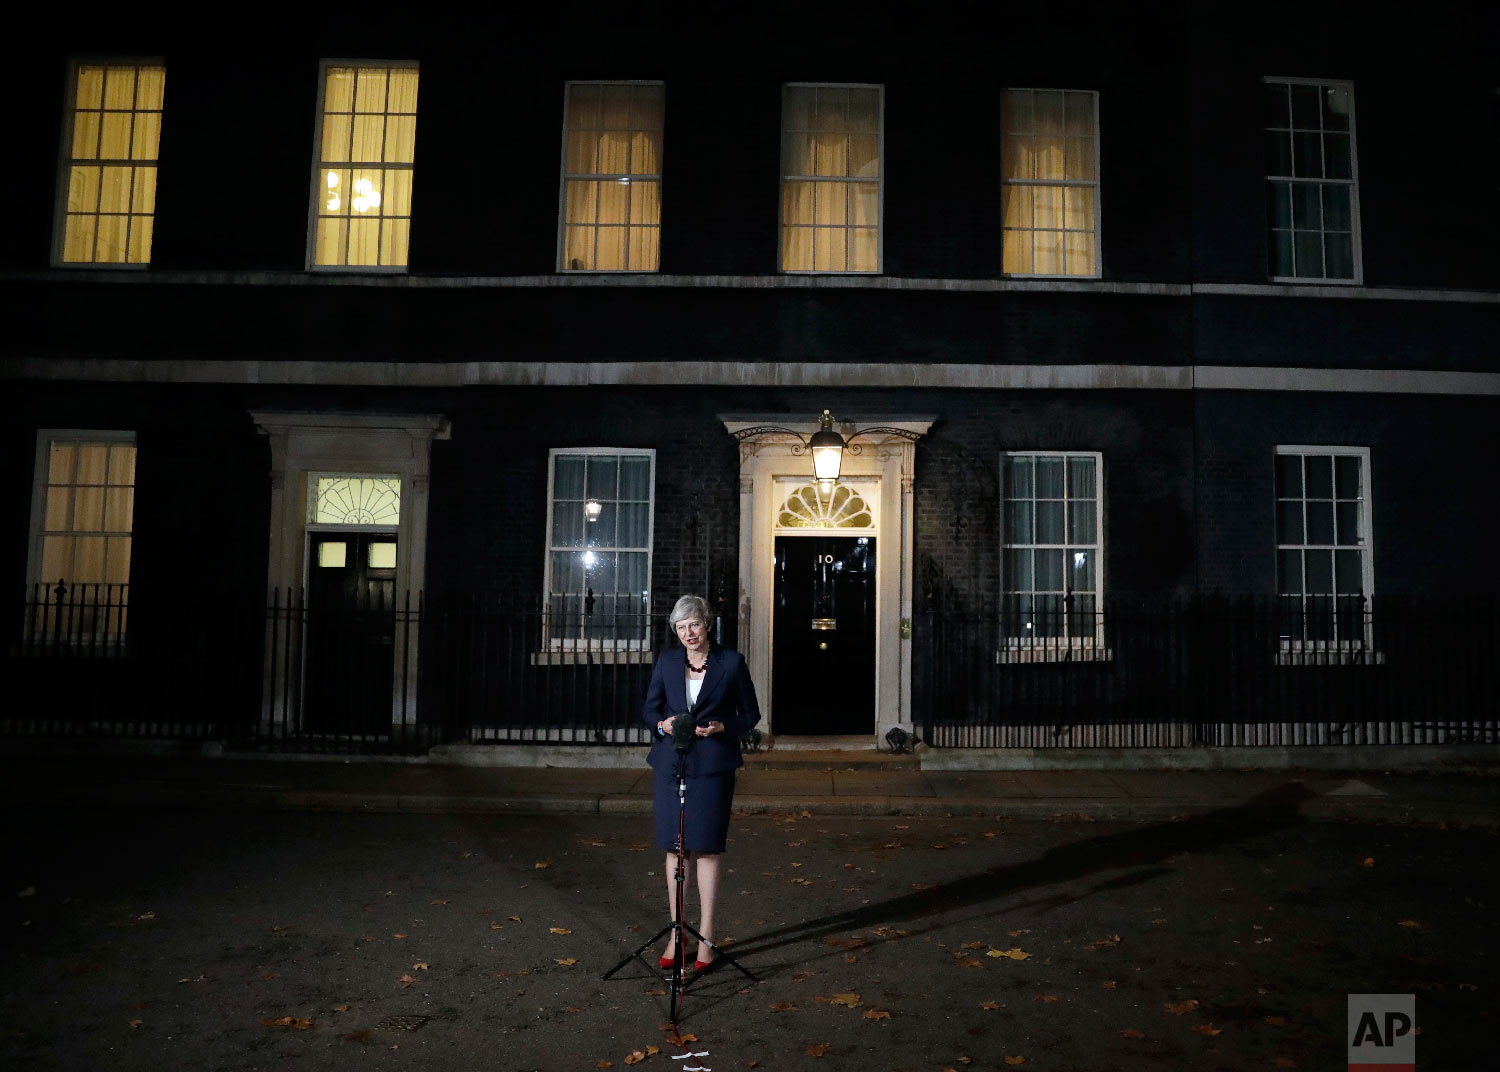  Britain's Prime Minister Theresa May announces that her Cabinet has agreed to a draft Brexit deal with the European Union after "impassioned" debate, outside 10 Downing Street in London, on Nov. 14, 2018. (AP Photo/Matt Dunham) 